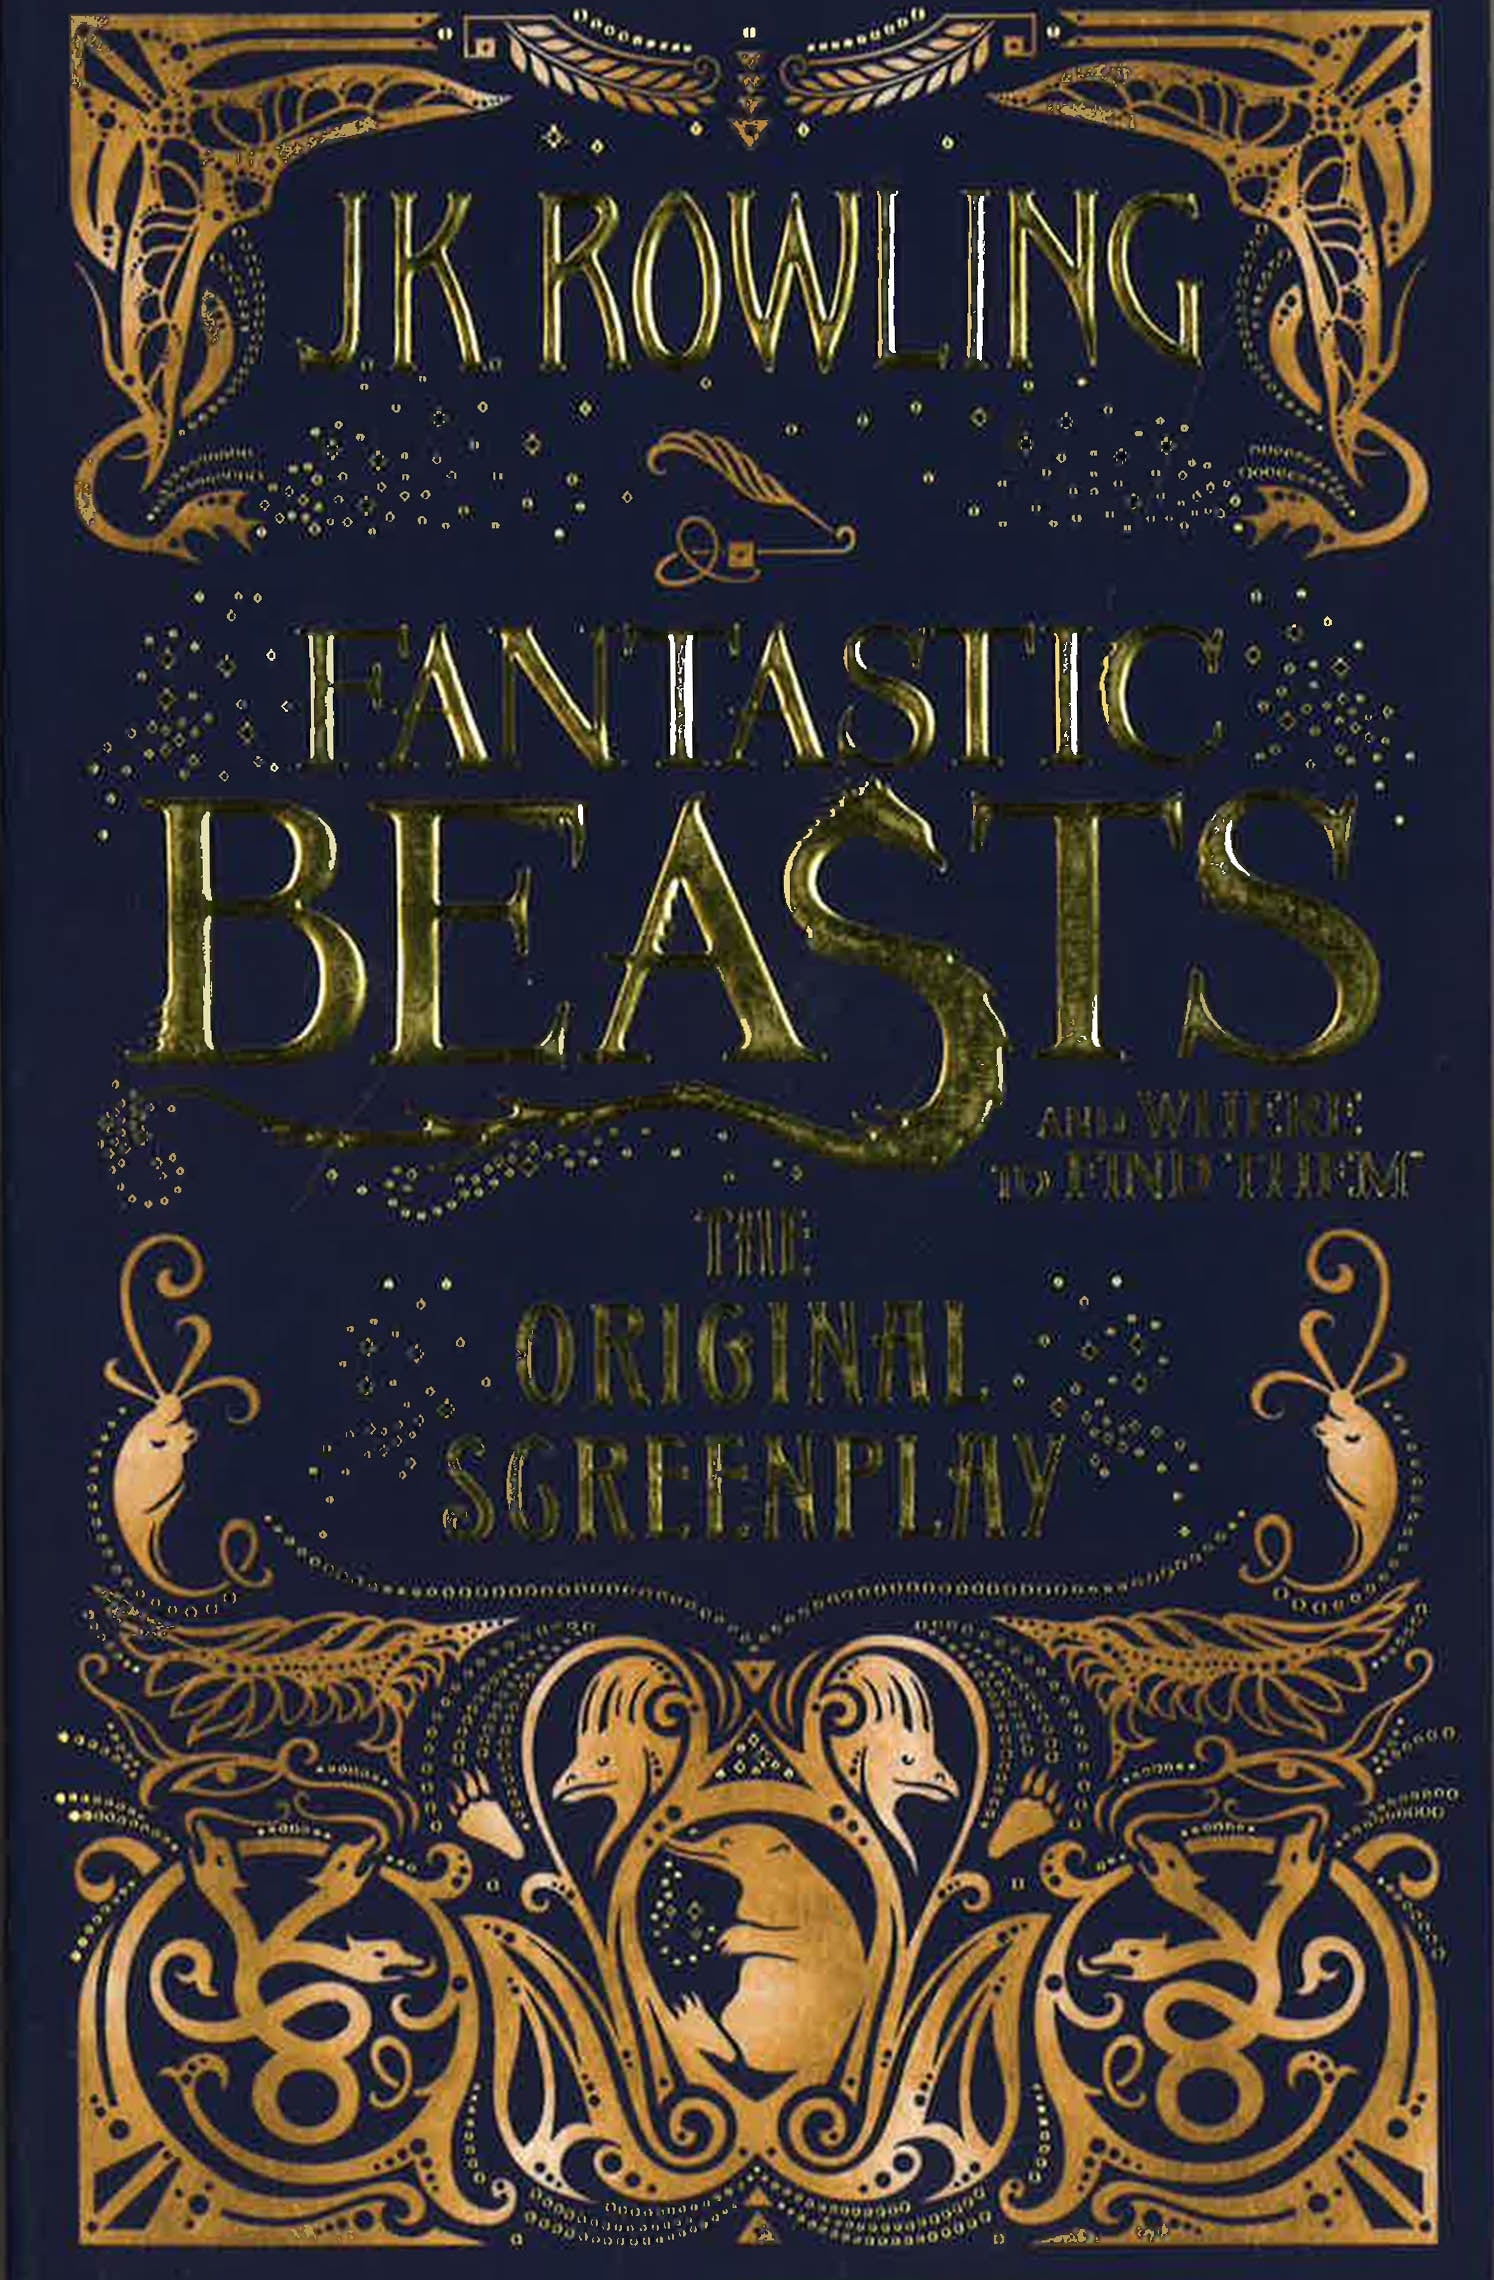 The essential guide to Harry Potter and Fantastic Beasts has just been  released